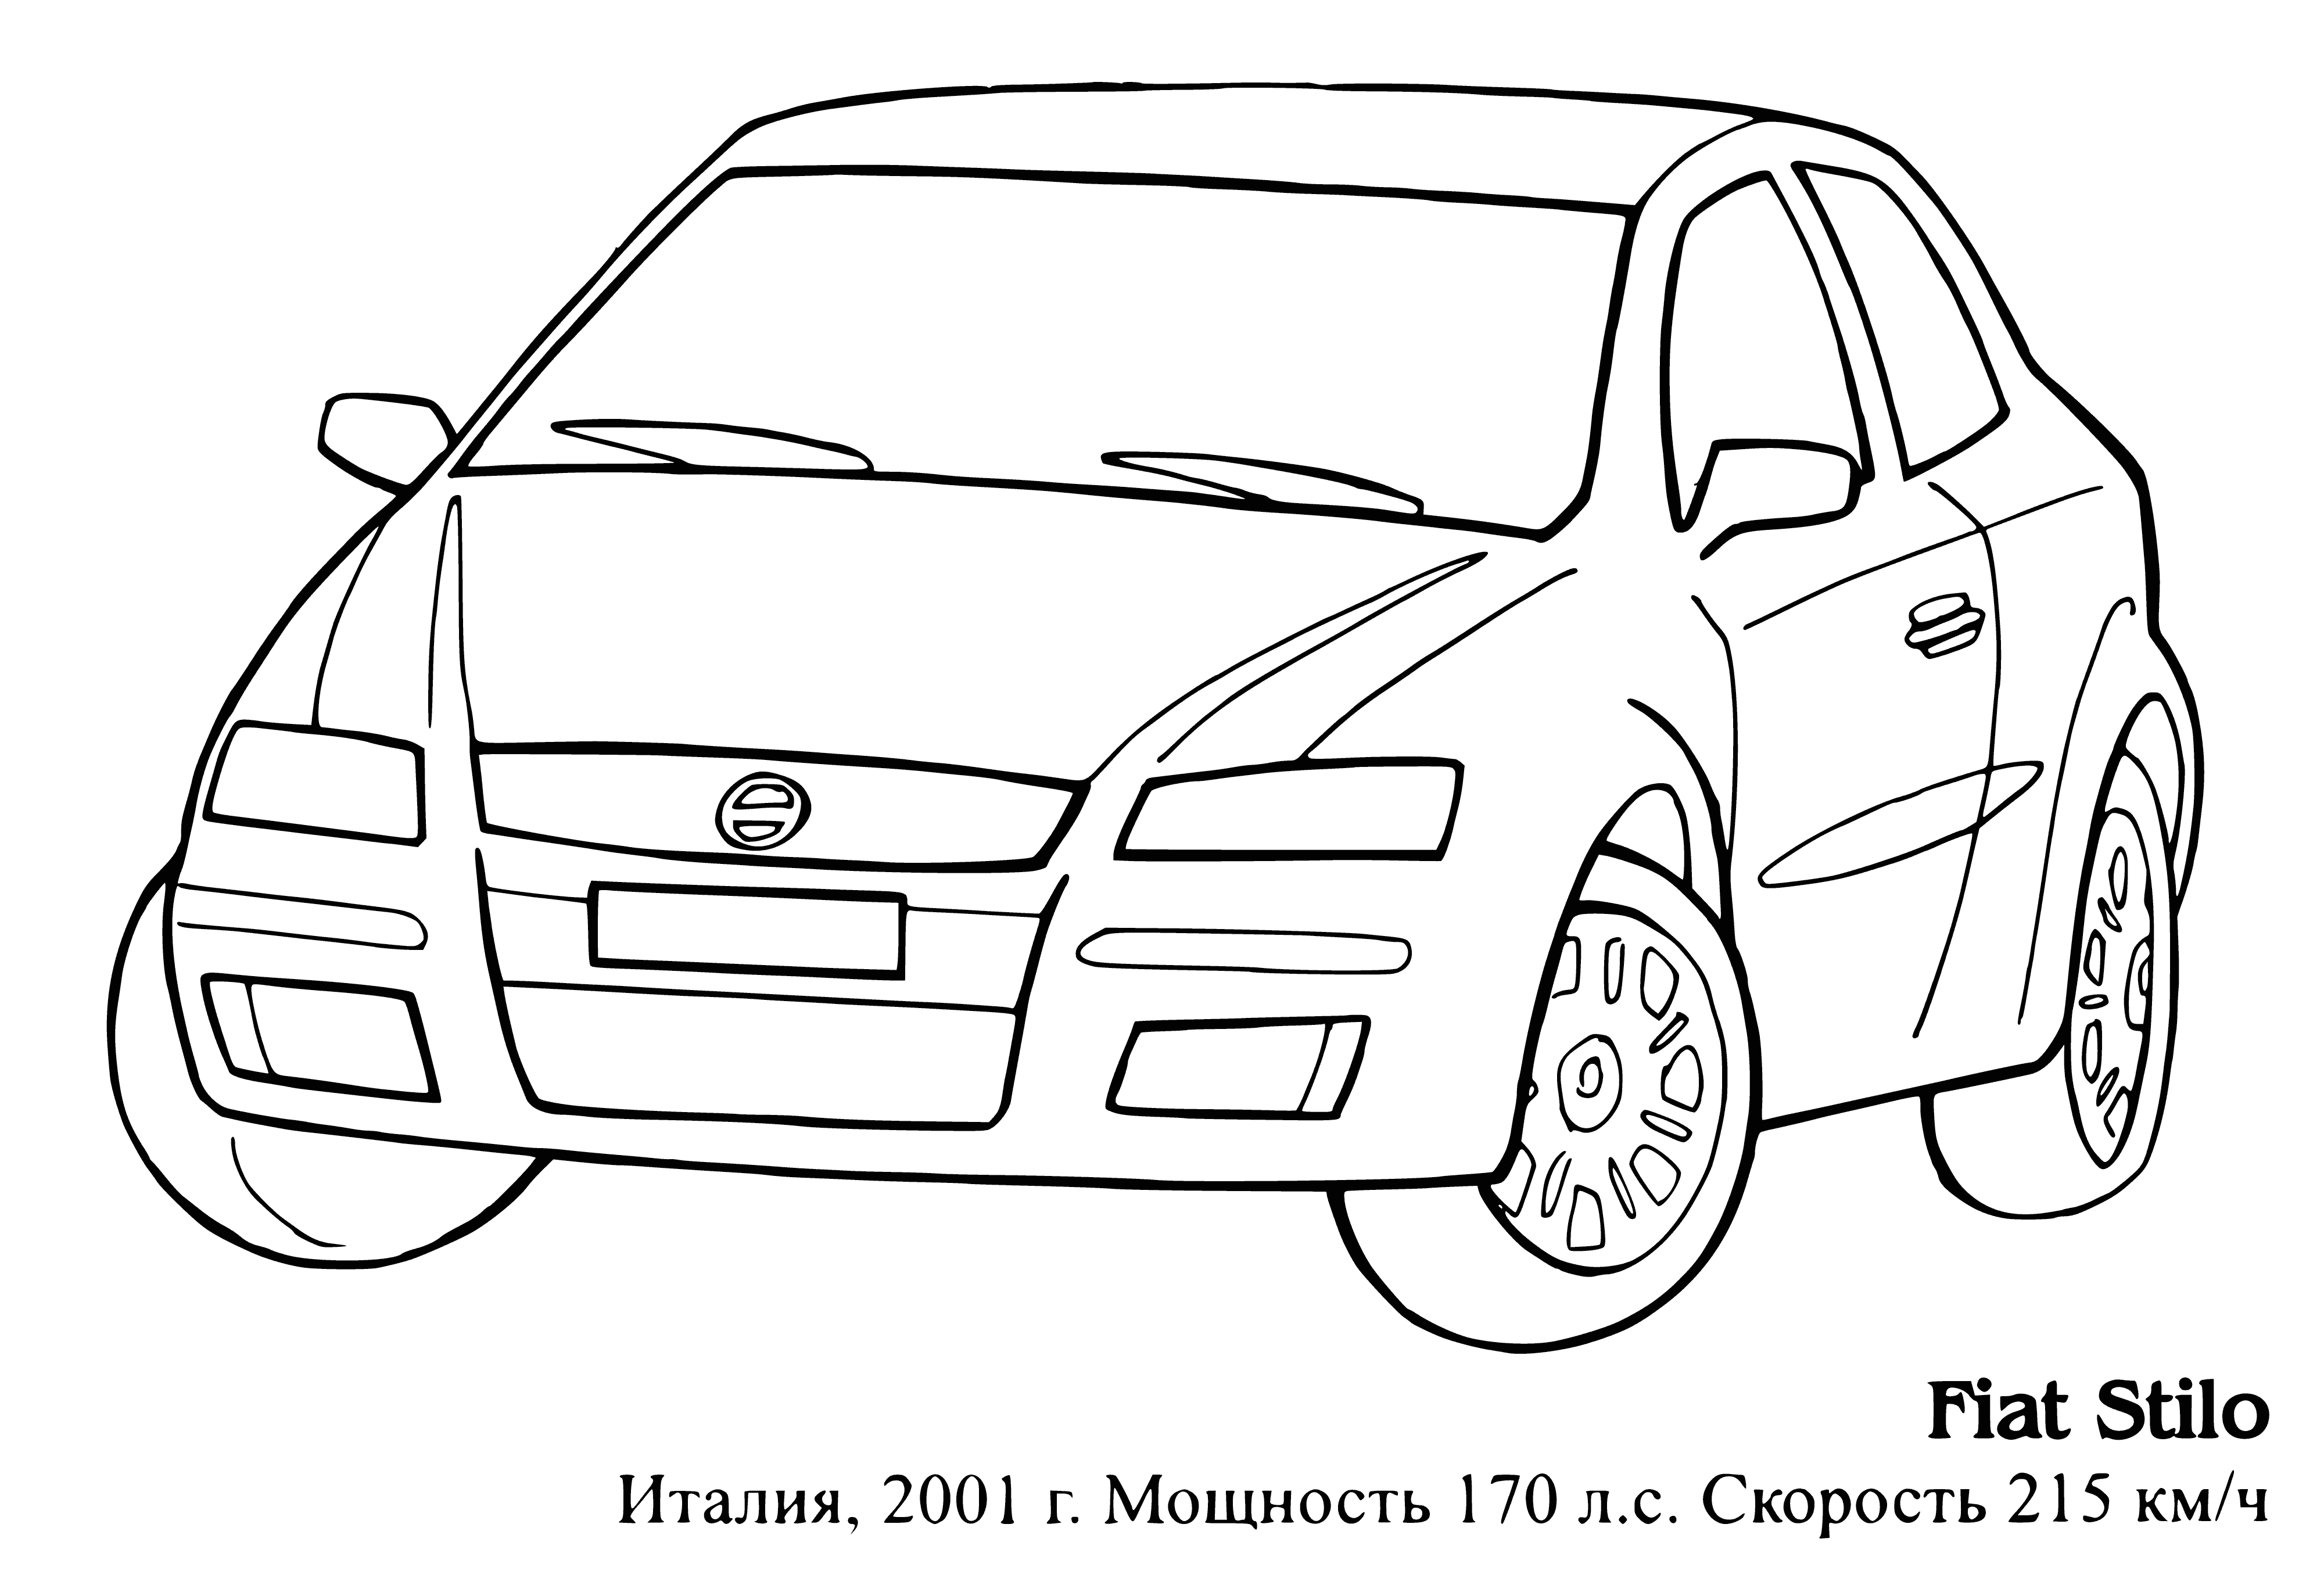 coloring page: Car is paged blue w/ white stripe & rings around tires, round headlights & taillights.